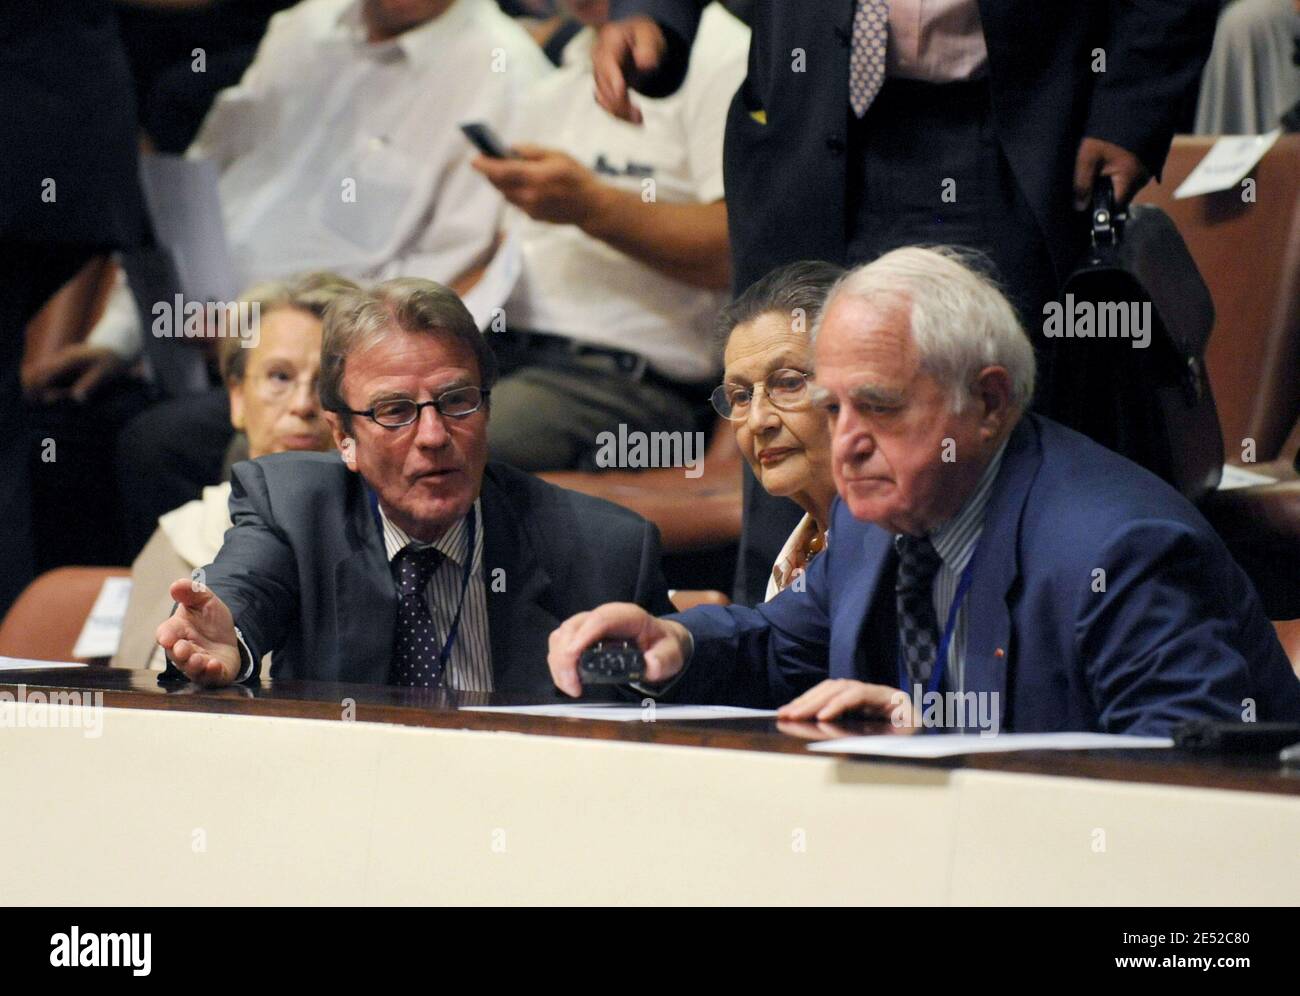 (L-R) French Interior Minister Michele Alliot-Marie, Foreign Minister Bernard Kouchner, Simone and Antoine Veil sit in the Knesset prior to French President Nicolas Sarkozy's speech, in Jerusalem, Israel on June 23, 2008, on the second day of Sarkozy's three-day state visit to Israel and the Palestinian Territories. Photo by Jacques Witt/Pool/ABACAPRESS.COM Stock Photo